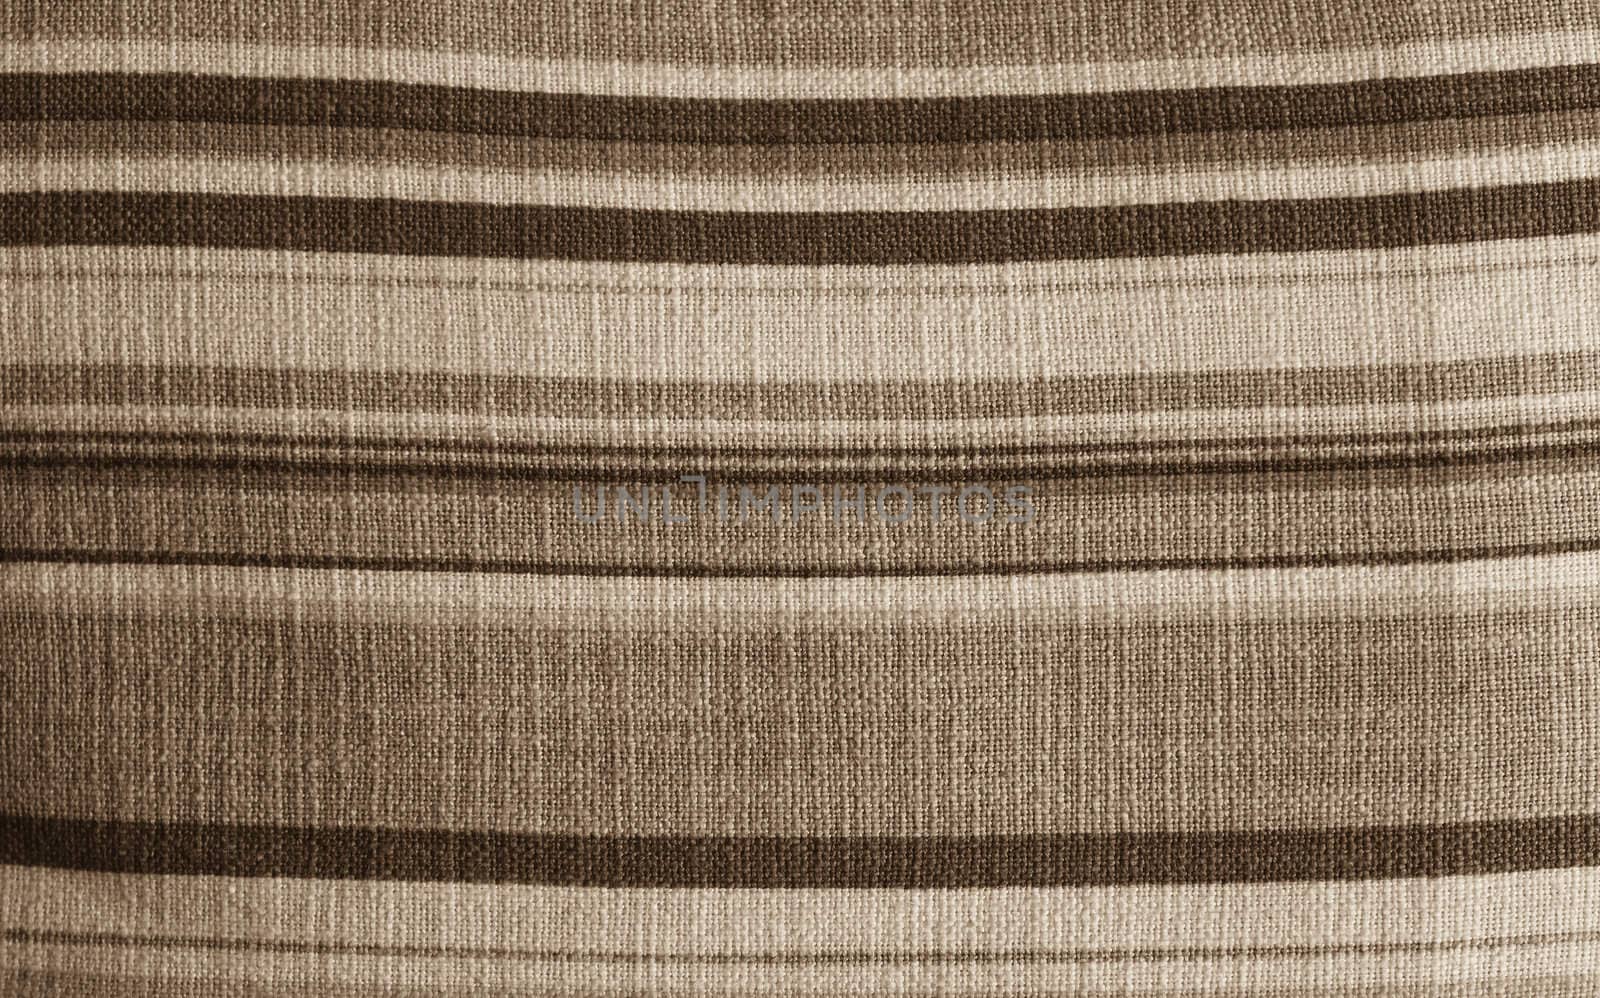 Fabric brown by jame_j@homail.com